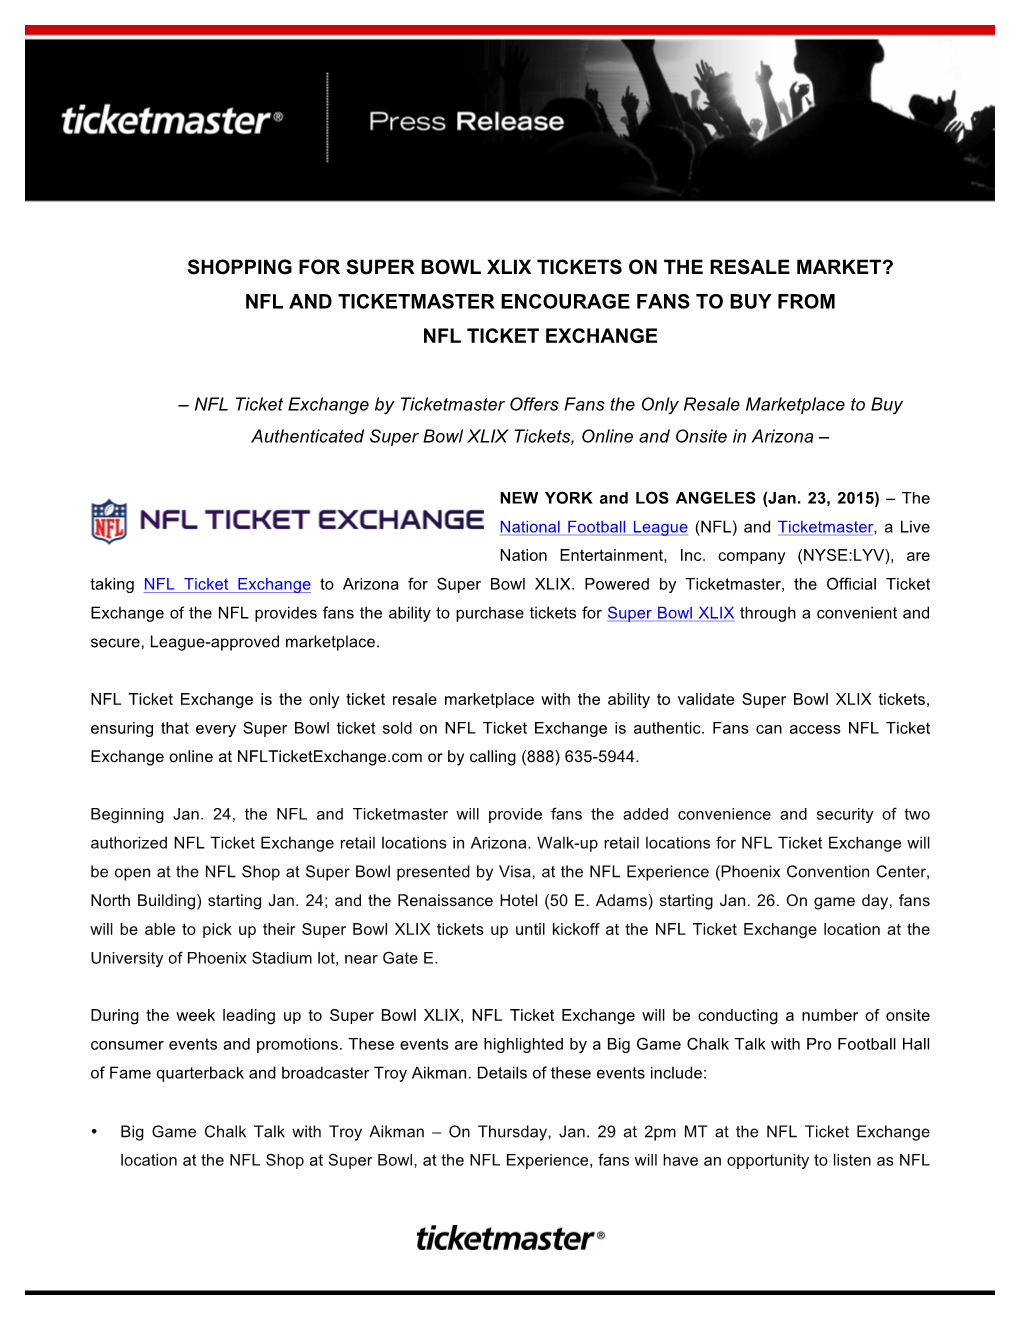 Shopping for Super Bowl Xlix Tickets on the Resale Market? Nfl and Ticketmaster Encourage Fans to Buy from Nfl Ticket Exchange